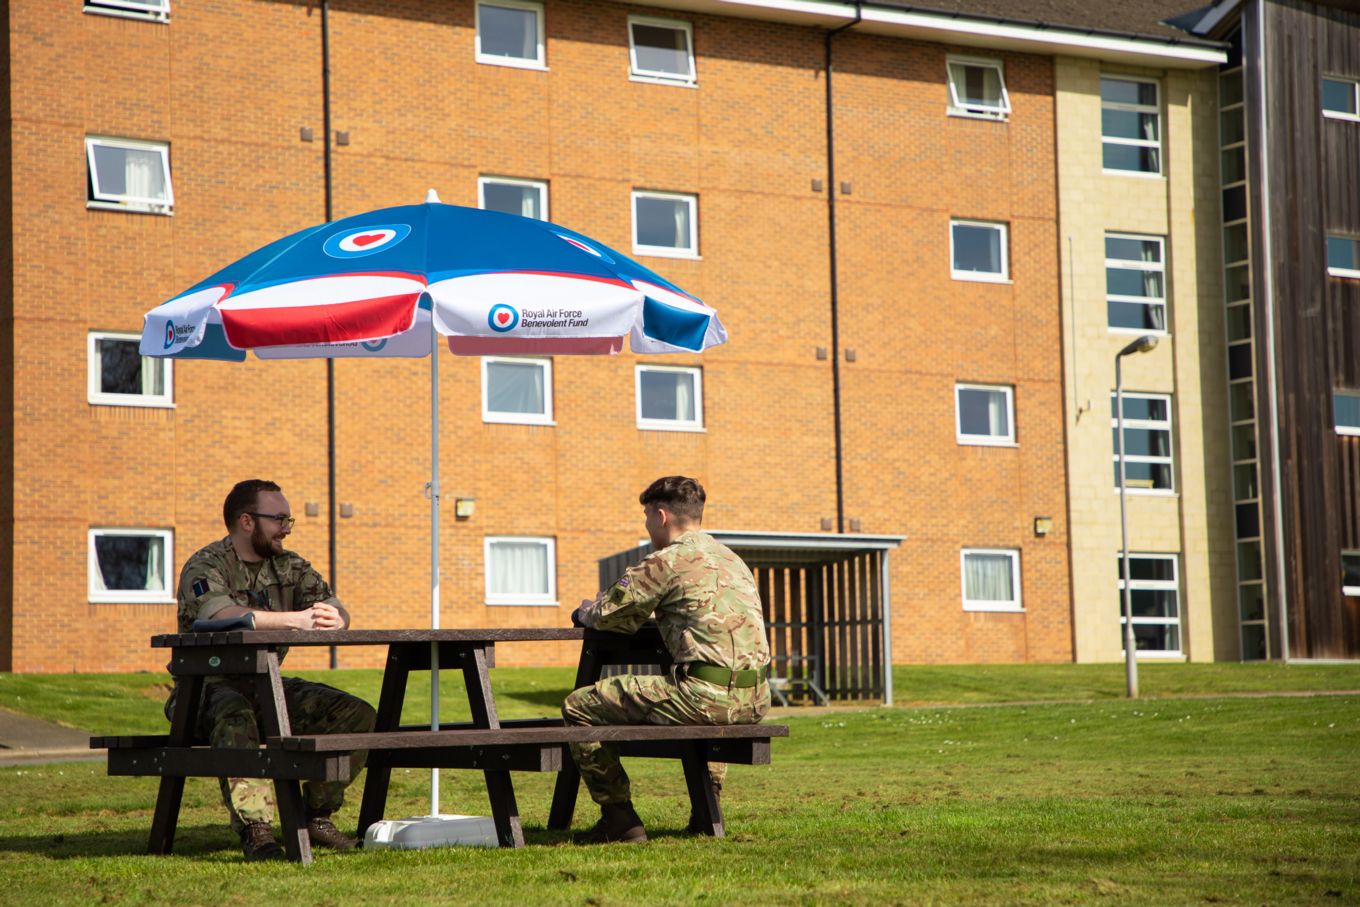 Personnel enjoying warm weather and shade at RAF Wittering